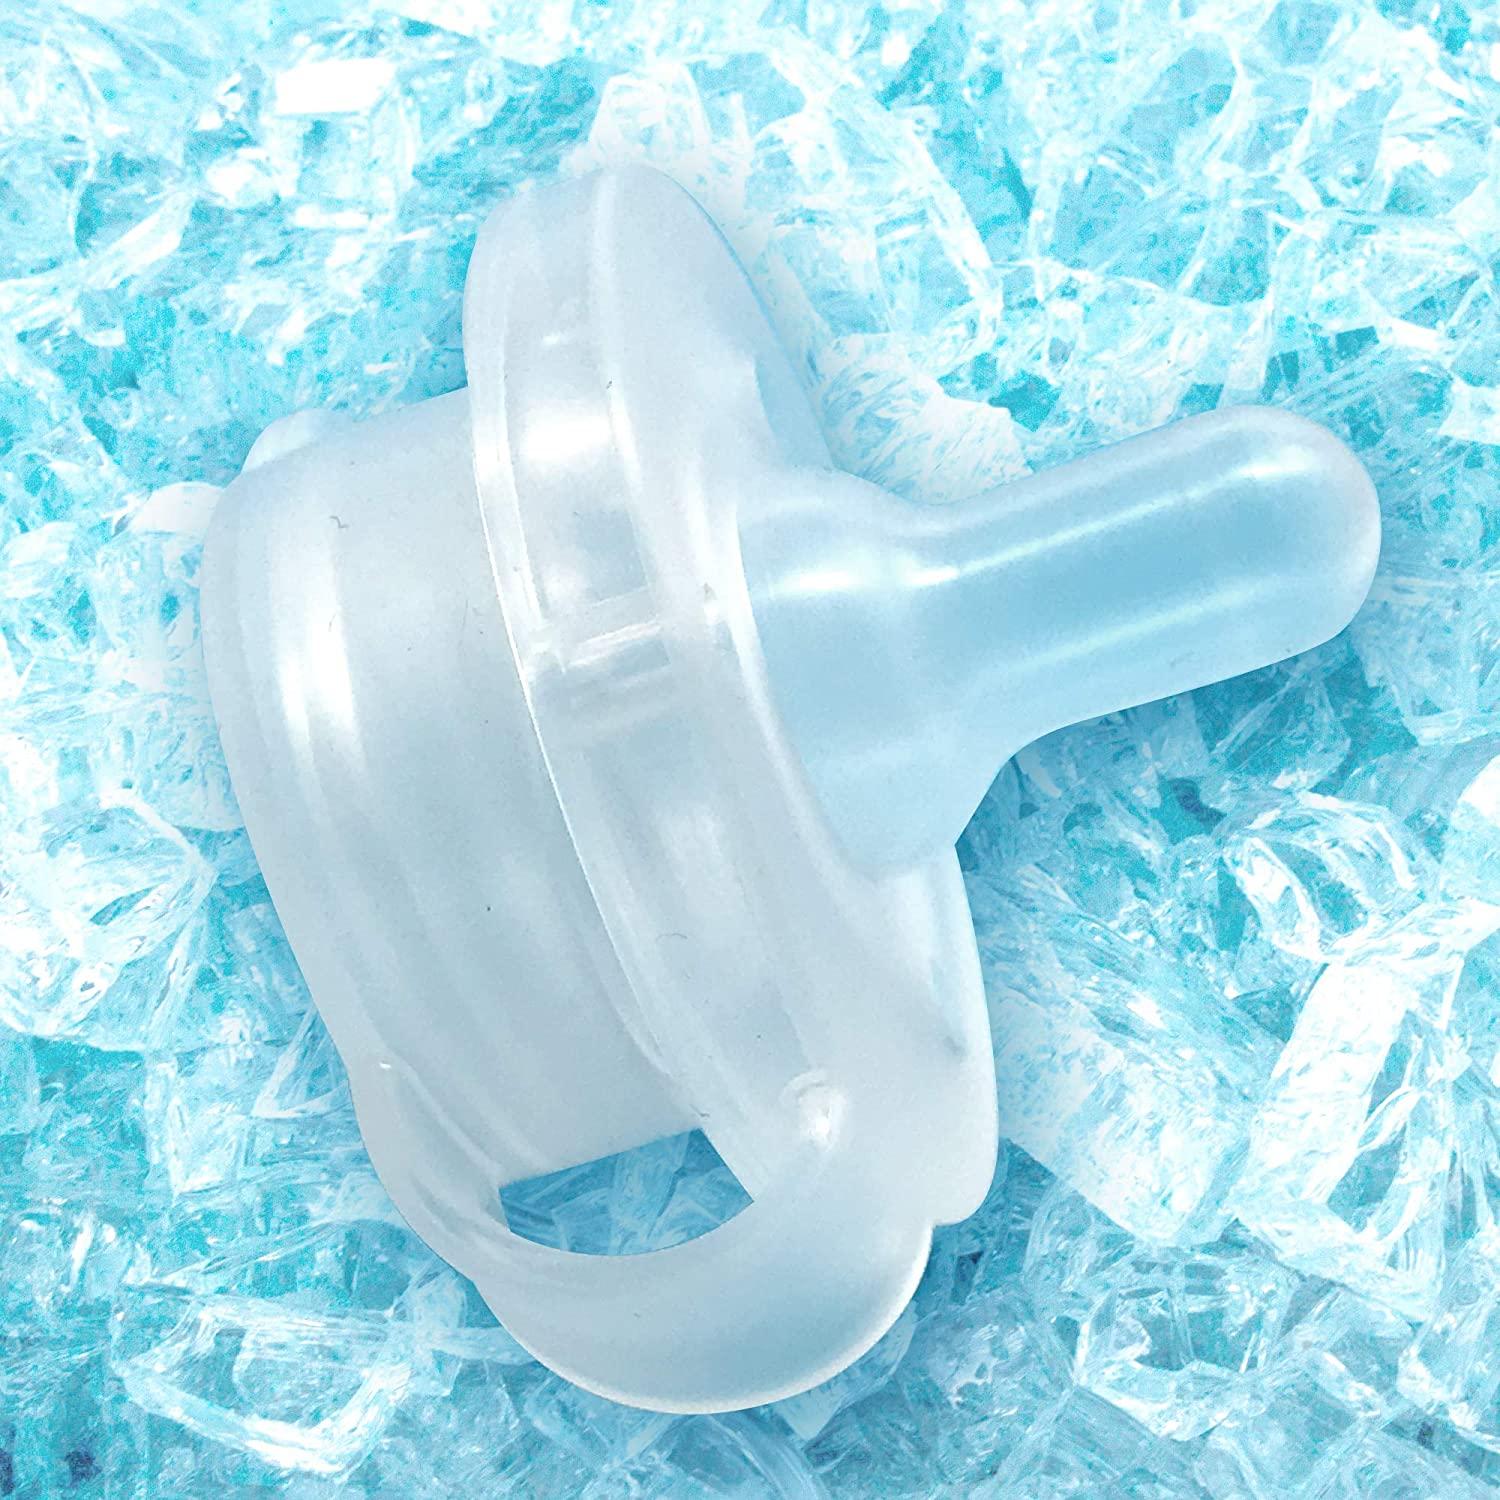 NEW Nippii® Freezable Pacifier Ice Cube Tray! – Nippii baby